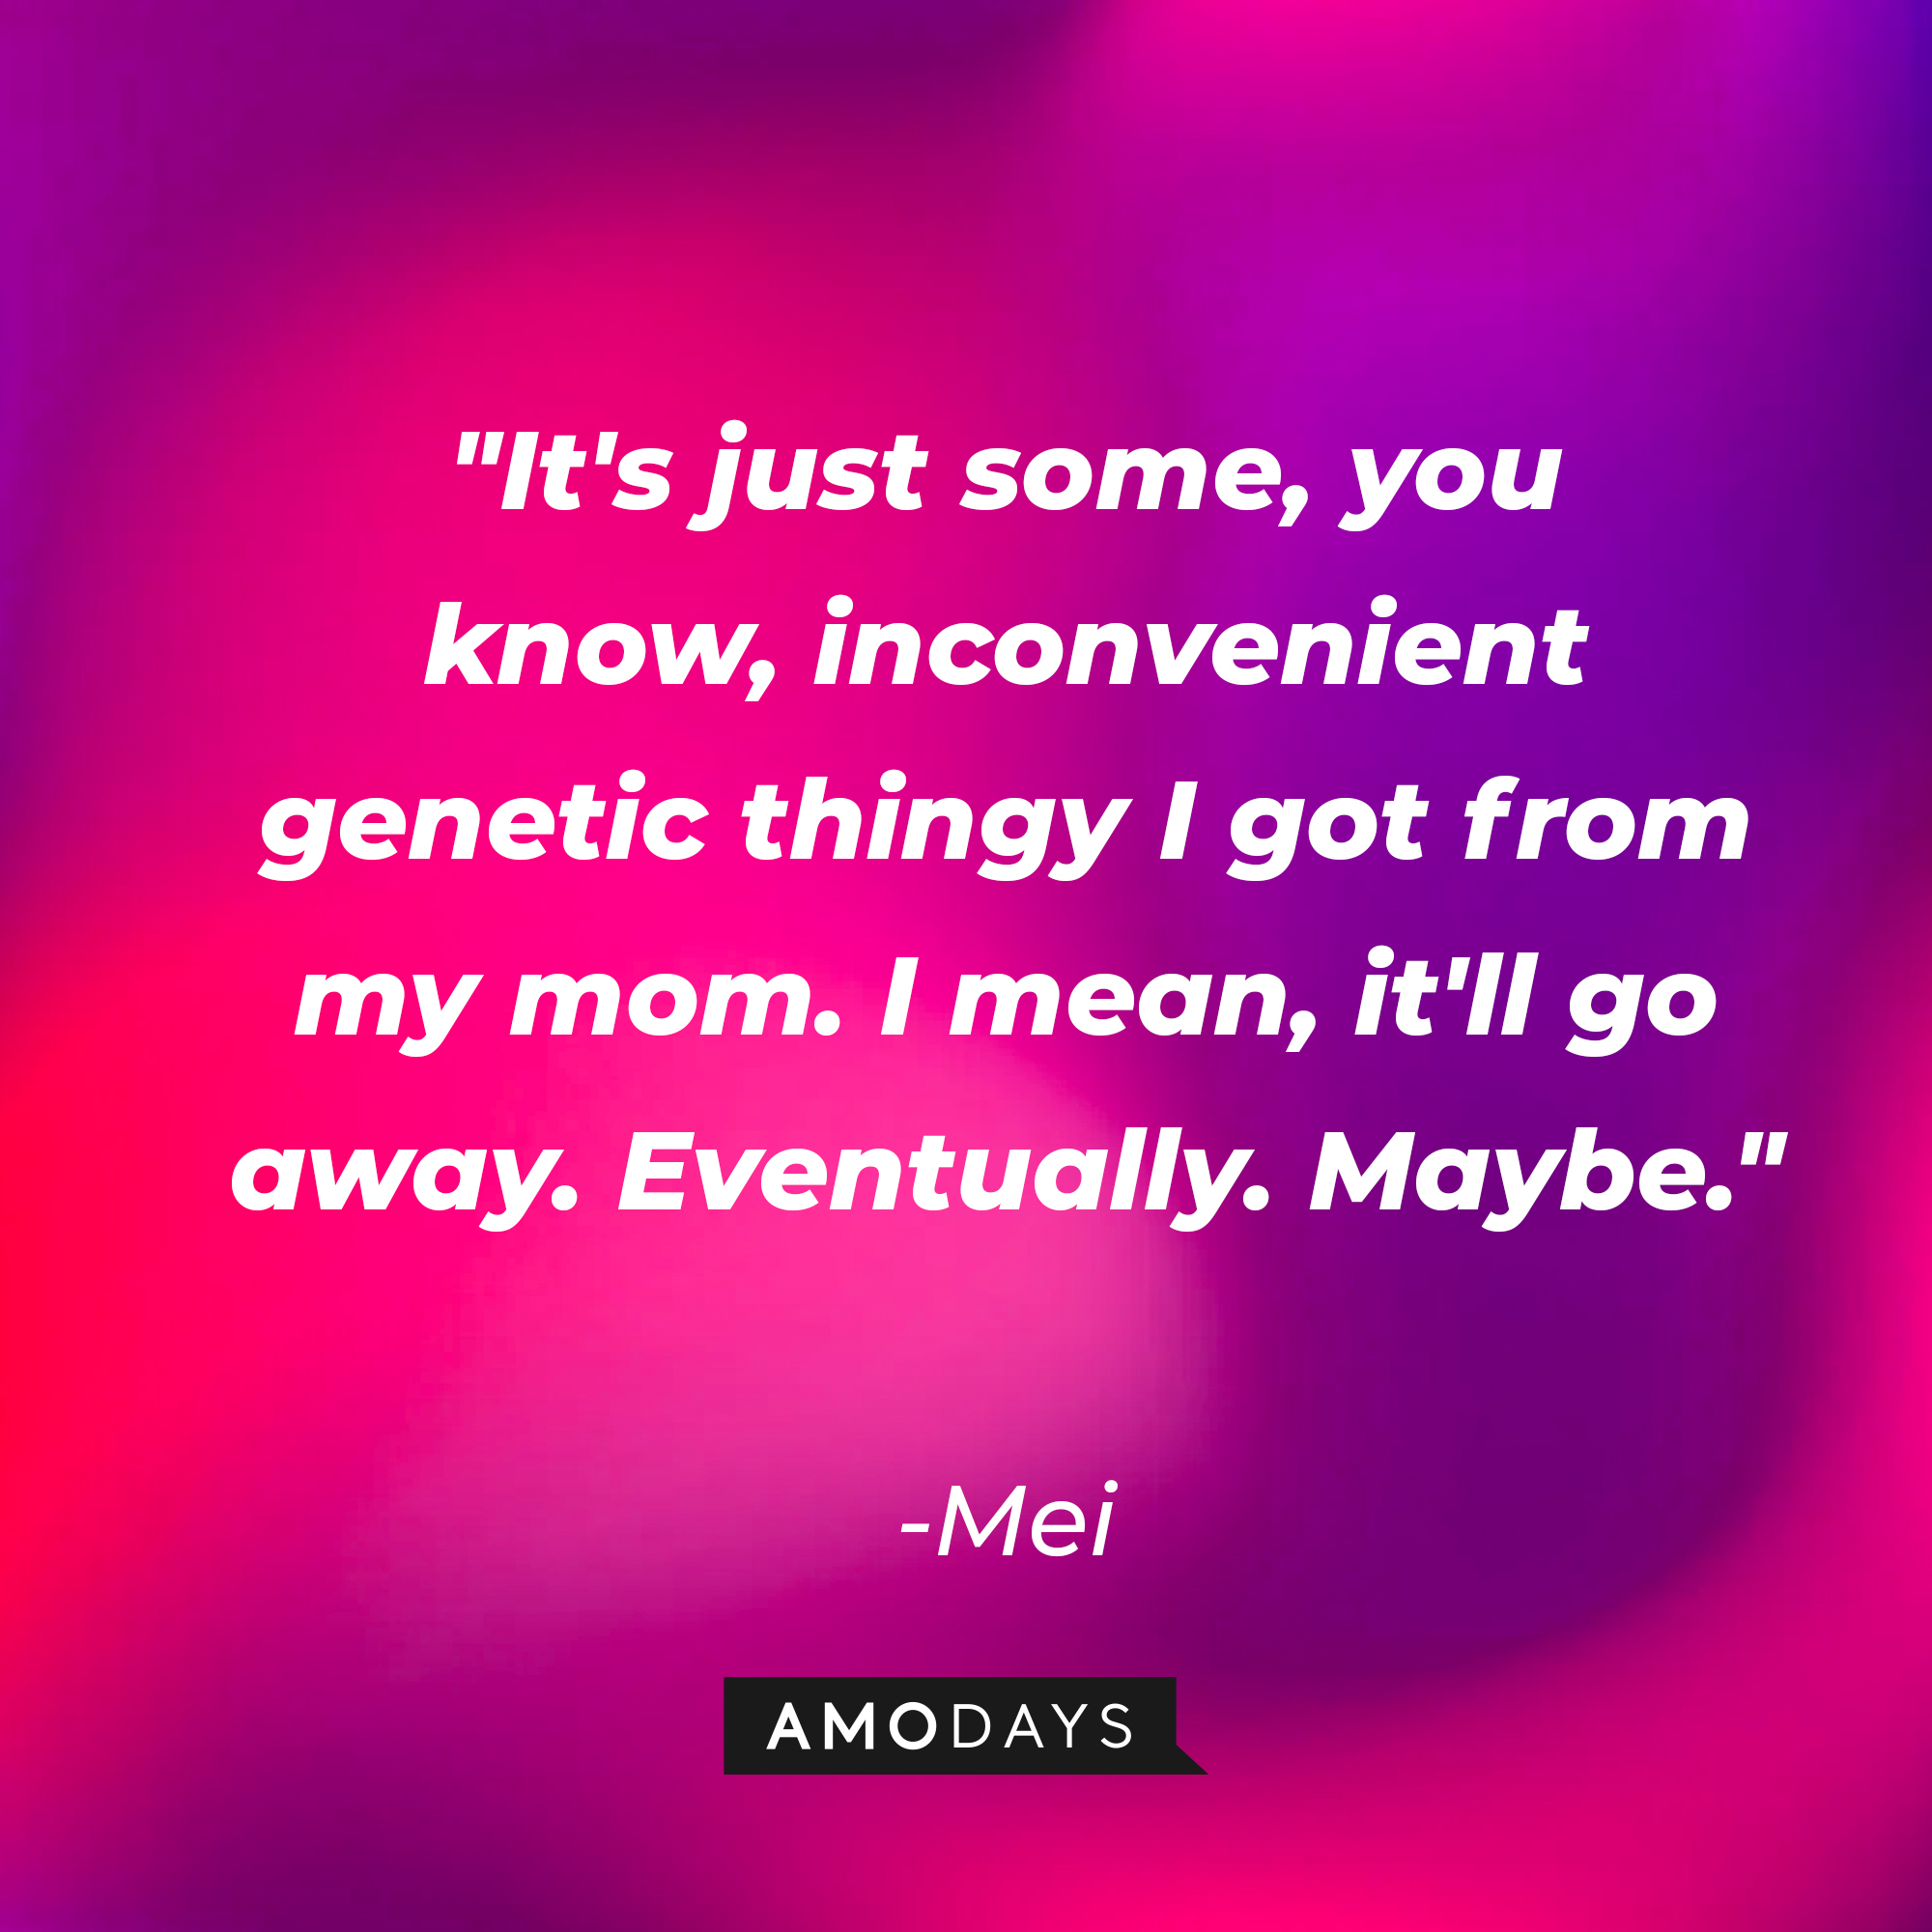 Mei's quote: "It's just some, you know, inconvenient genetic thingy I got from my mom. I mean, it'll go away. Eventually. Maybe." | Source: AmoDays